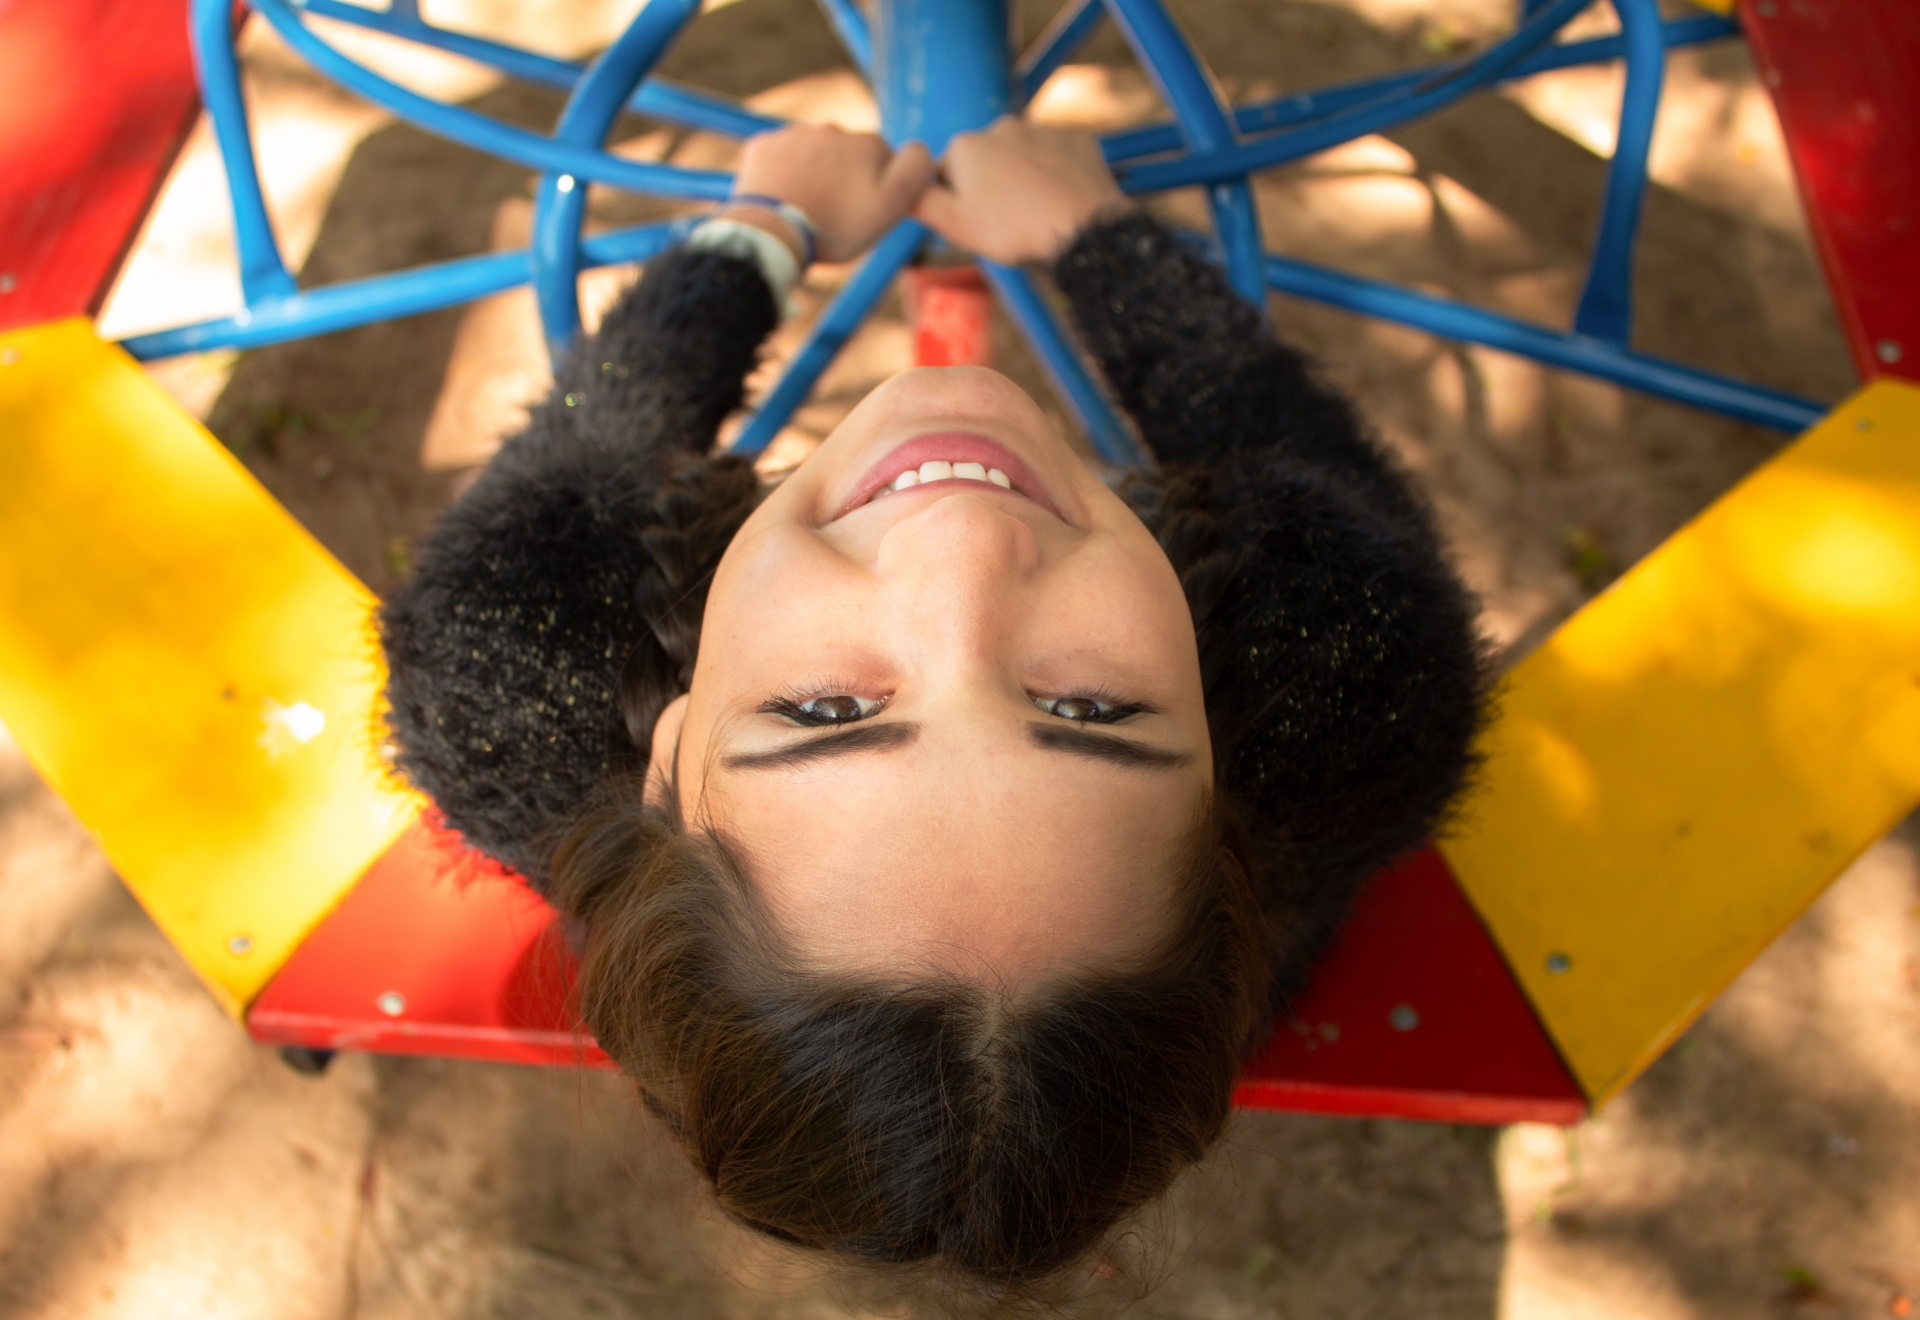 Child on playground equipment looking up and smiling